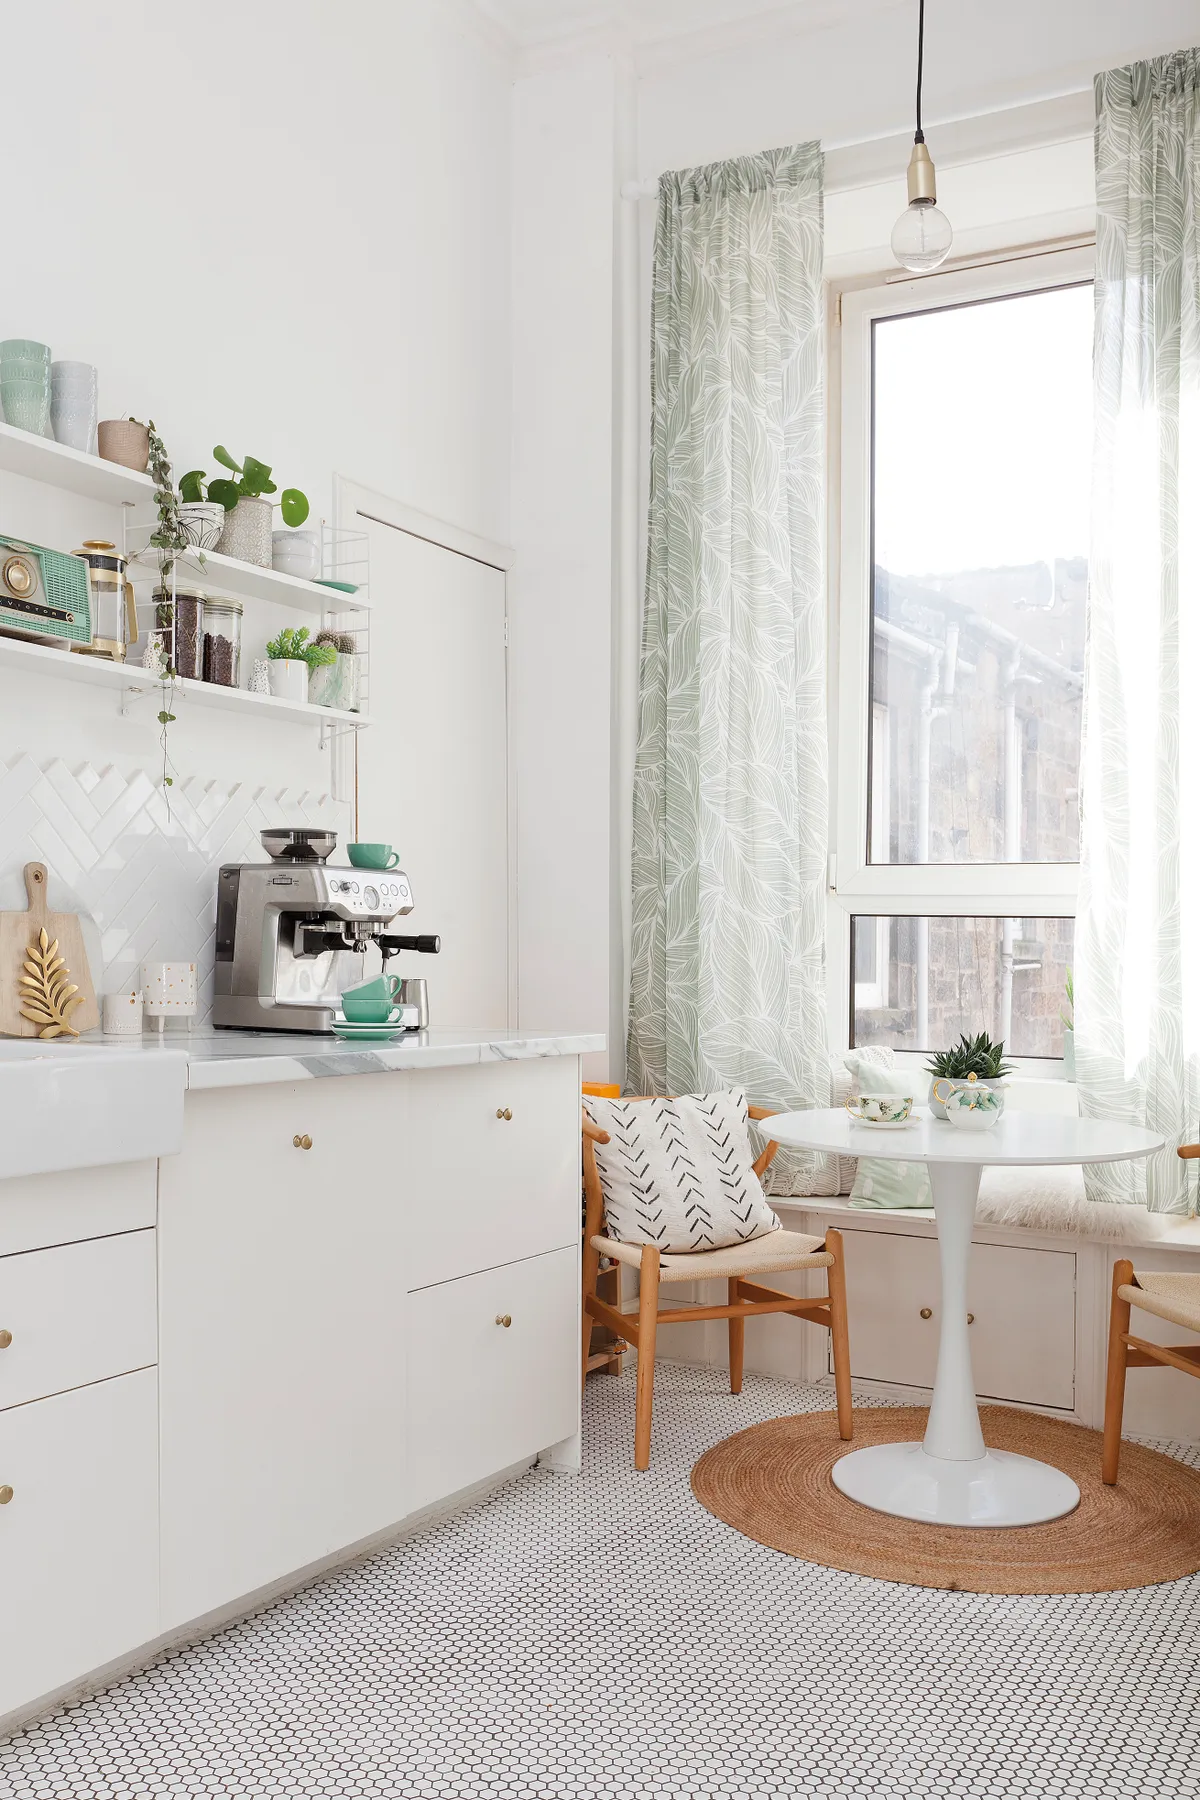 Kate’s picture-perfect kitchen has open shelving and a handy larder for storage. The open shelving gives plenty of opportunity to show off her collection of kitchenware, from mugs and plates to potted houseplants